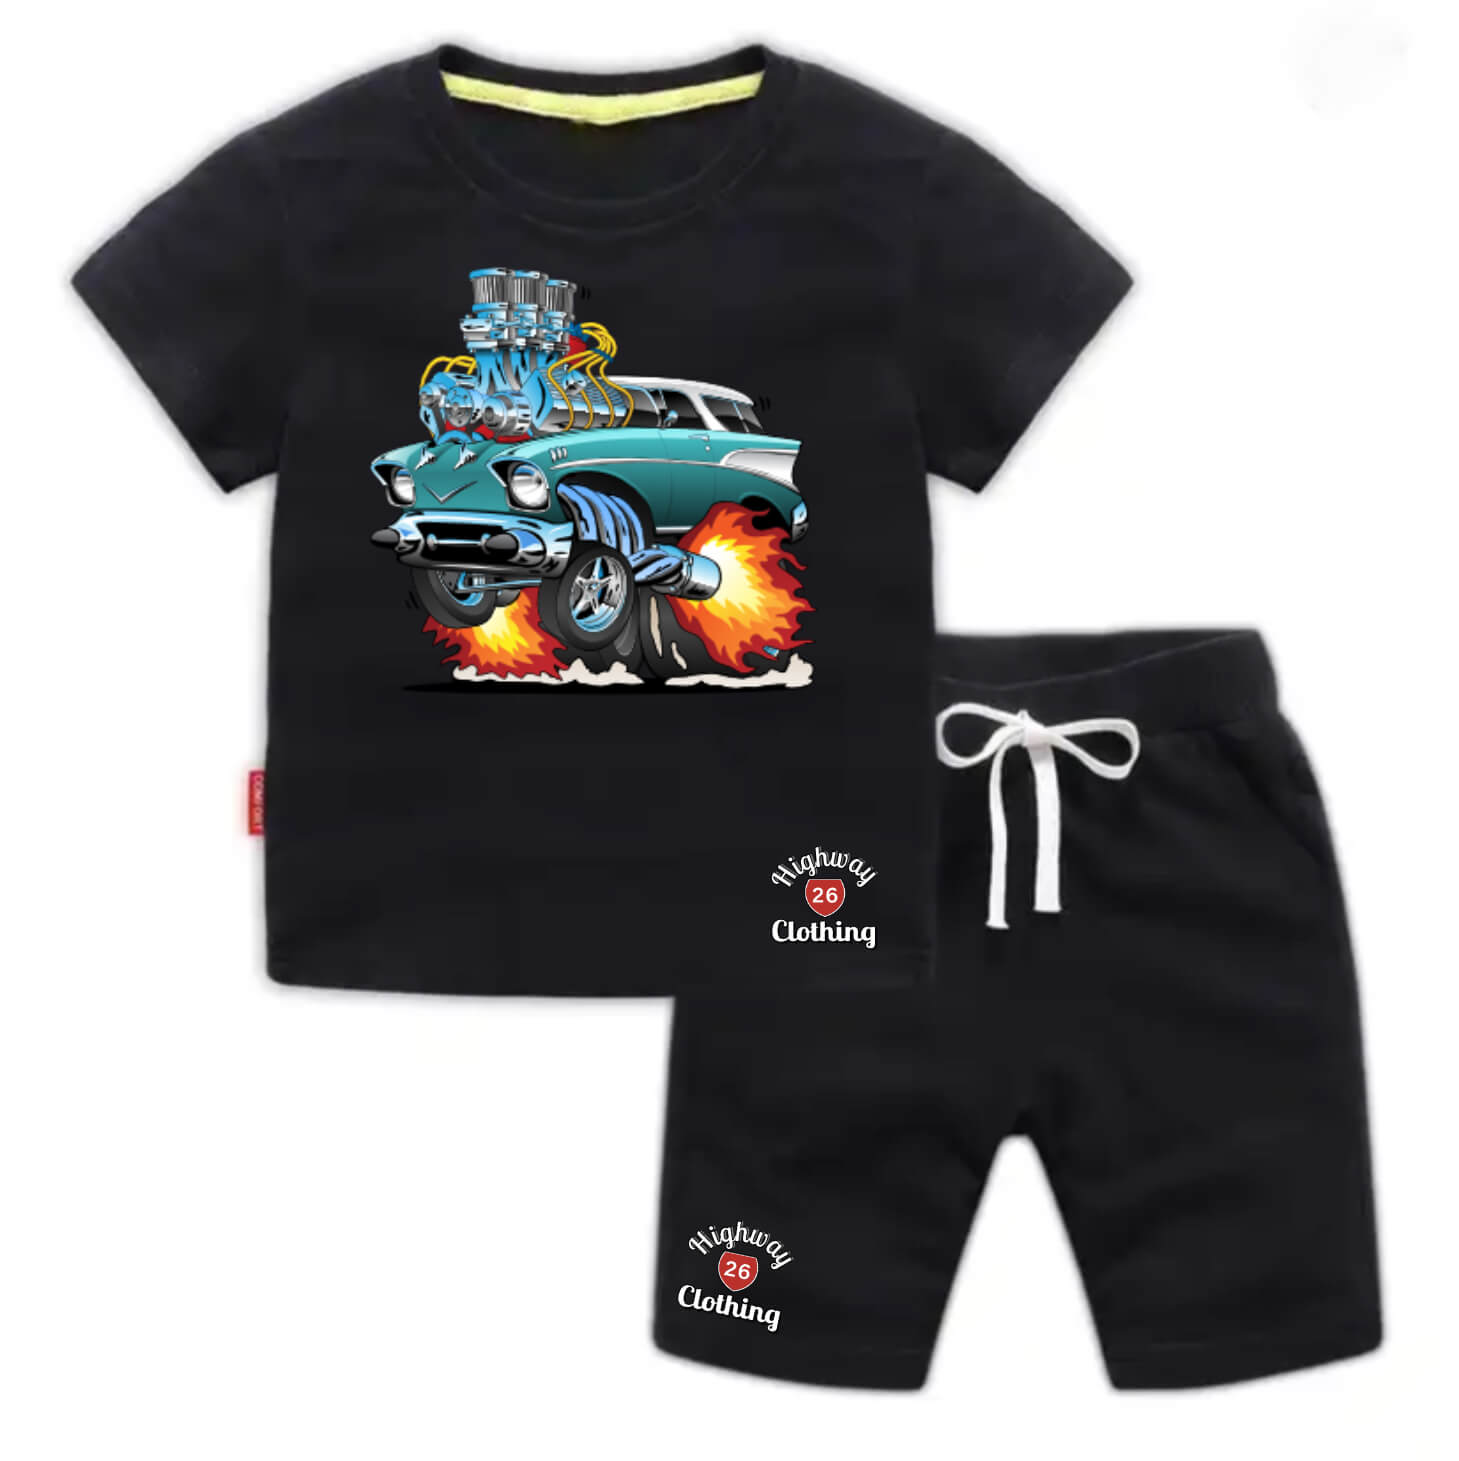 Chevy Belair t-shirt and short set - black - Highway 26 Clothing